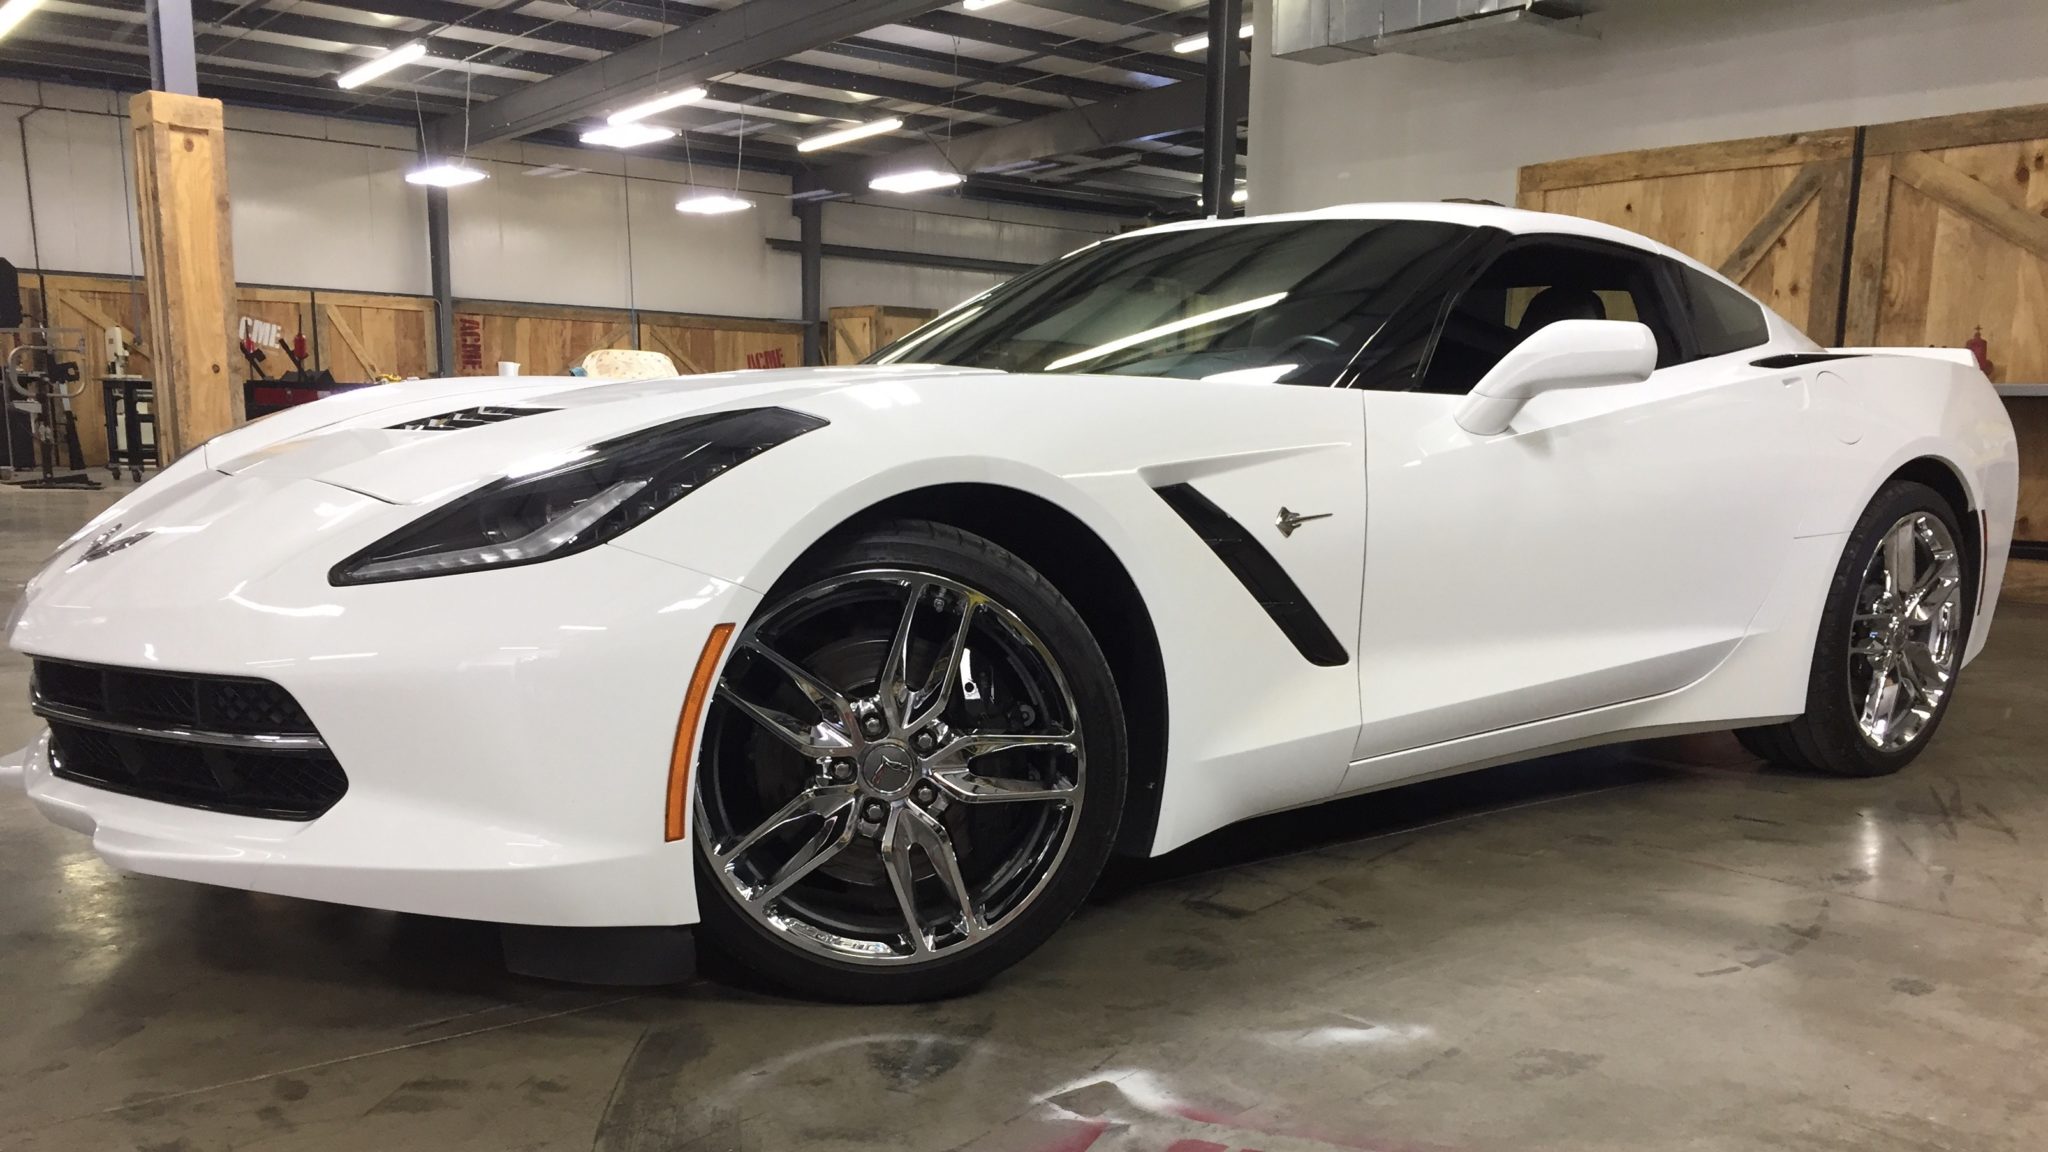 More Corvettes Arriving Daily!